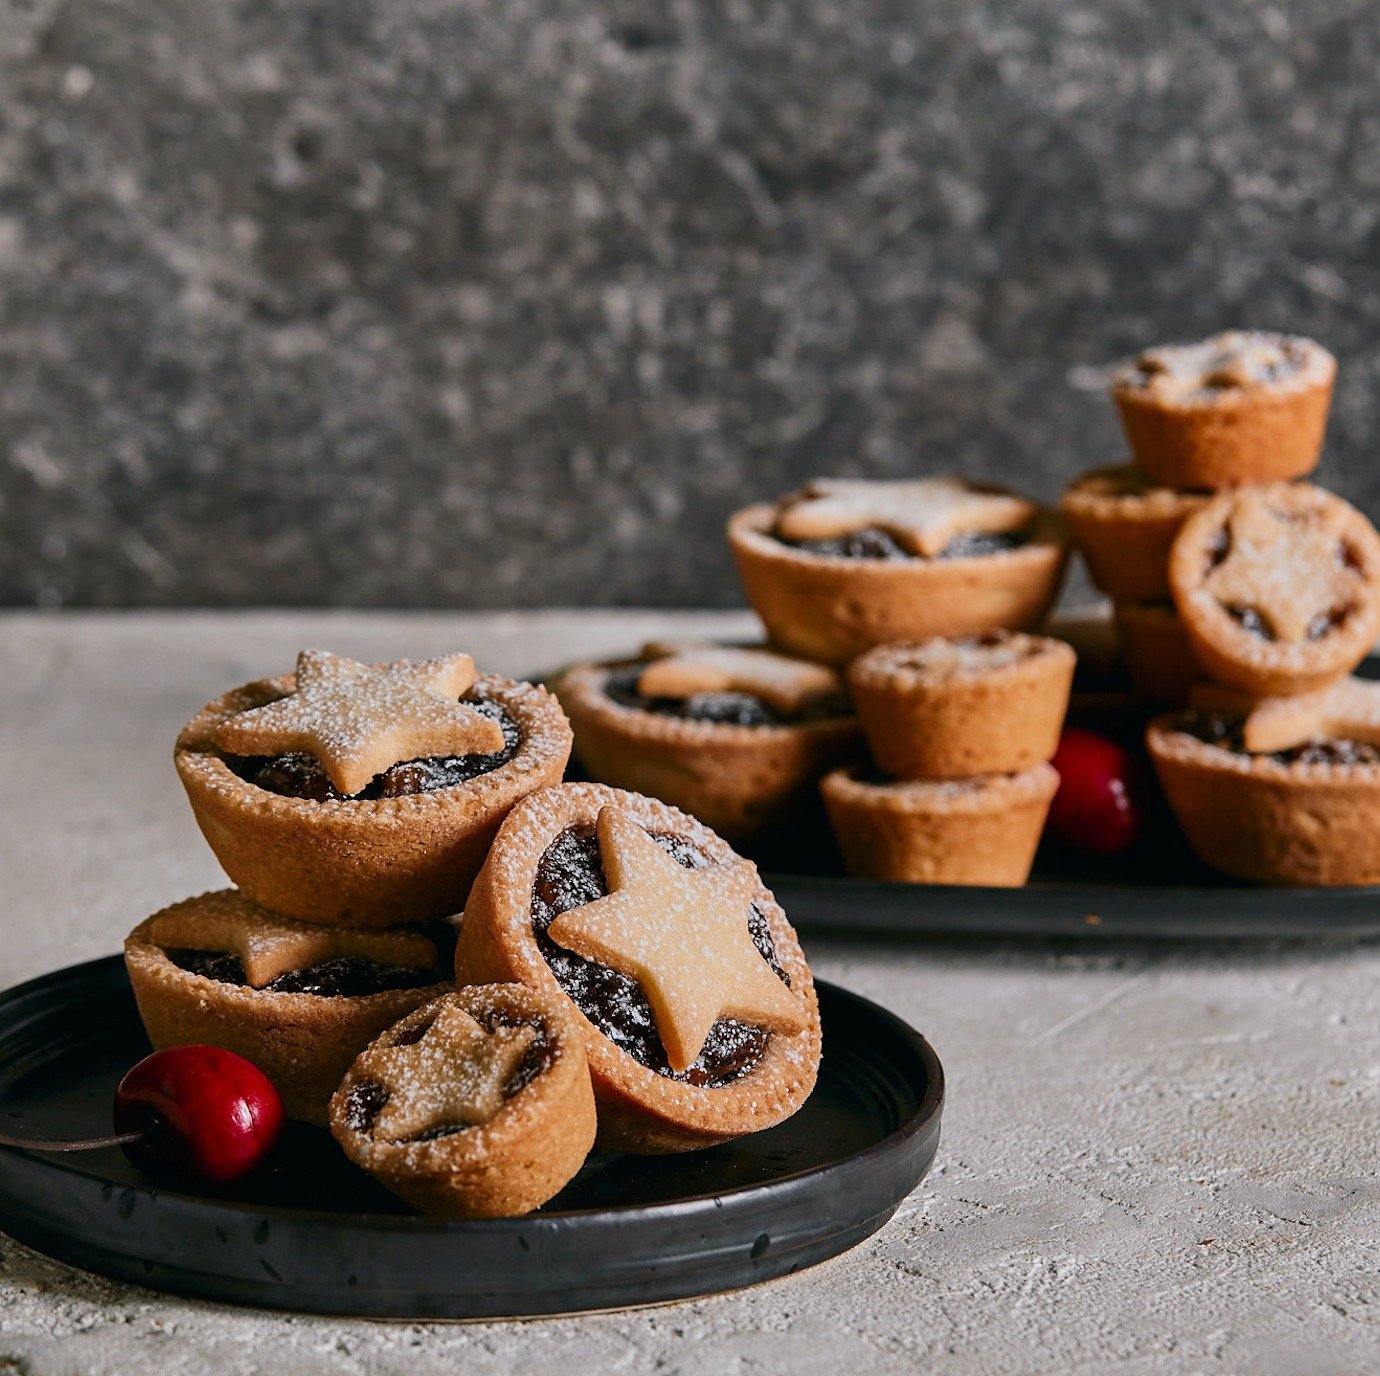 Fruit Mince Tarts are back!! 🍒🎄

Time is ticking with these beauties... Throw in your order with the quantities you crave by December 12th, and let the festivities begin.

Visit any of our Baketico locations for limited stock while they last or ord